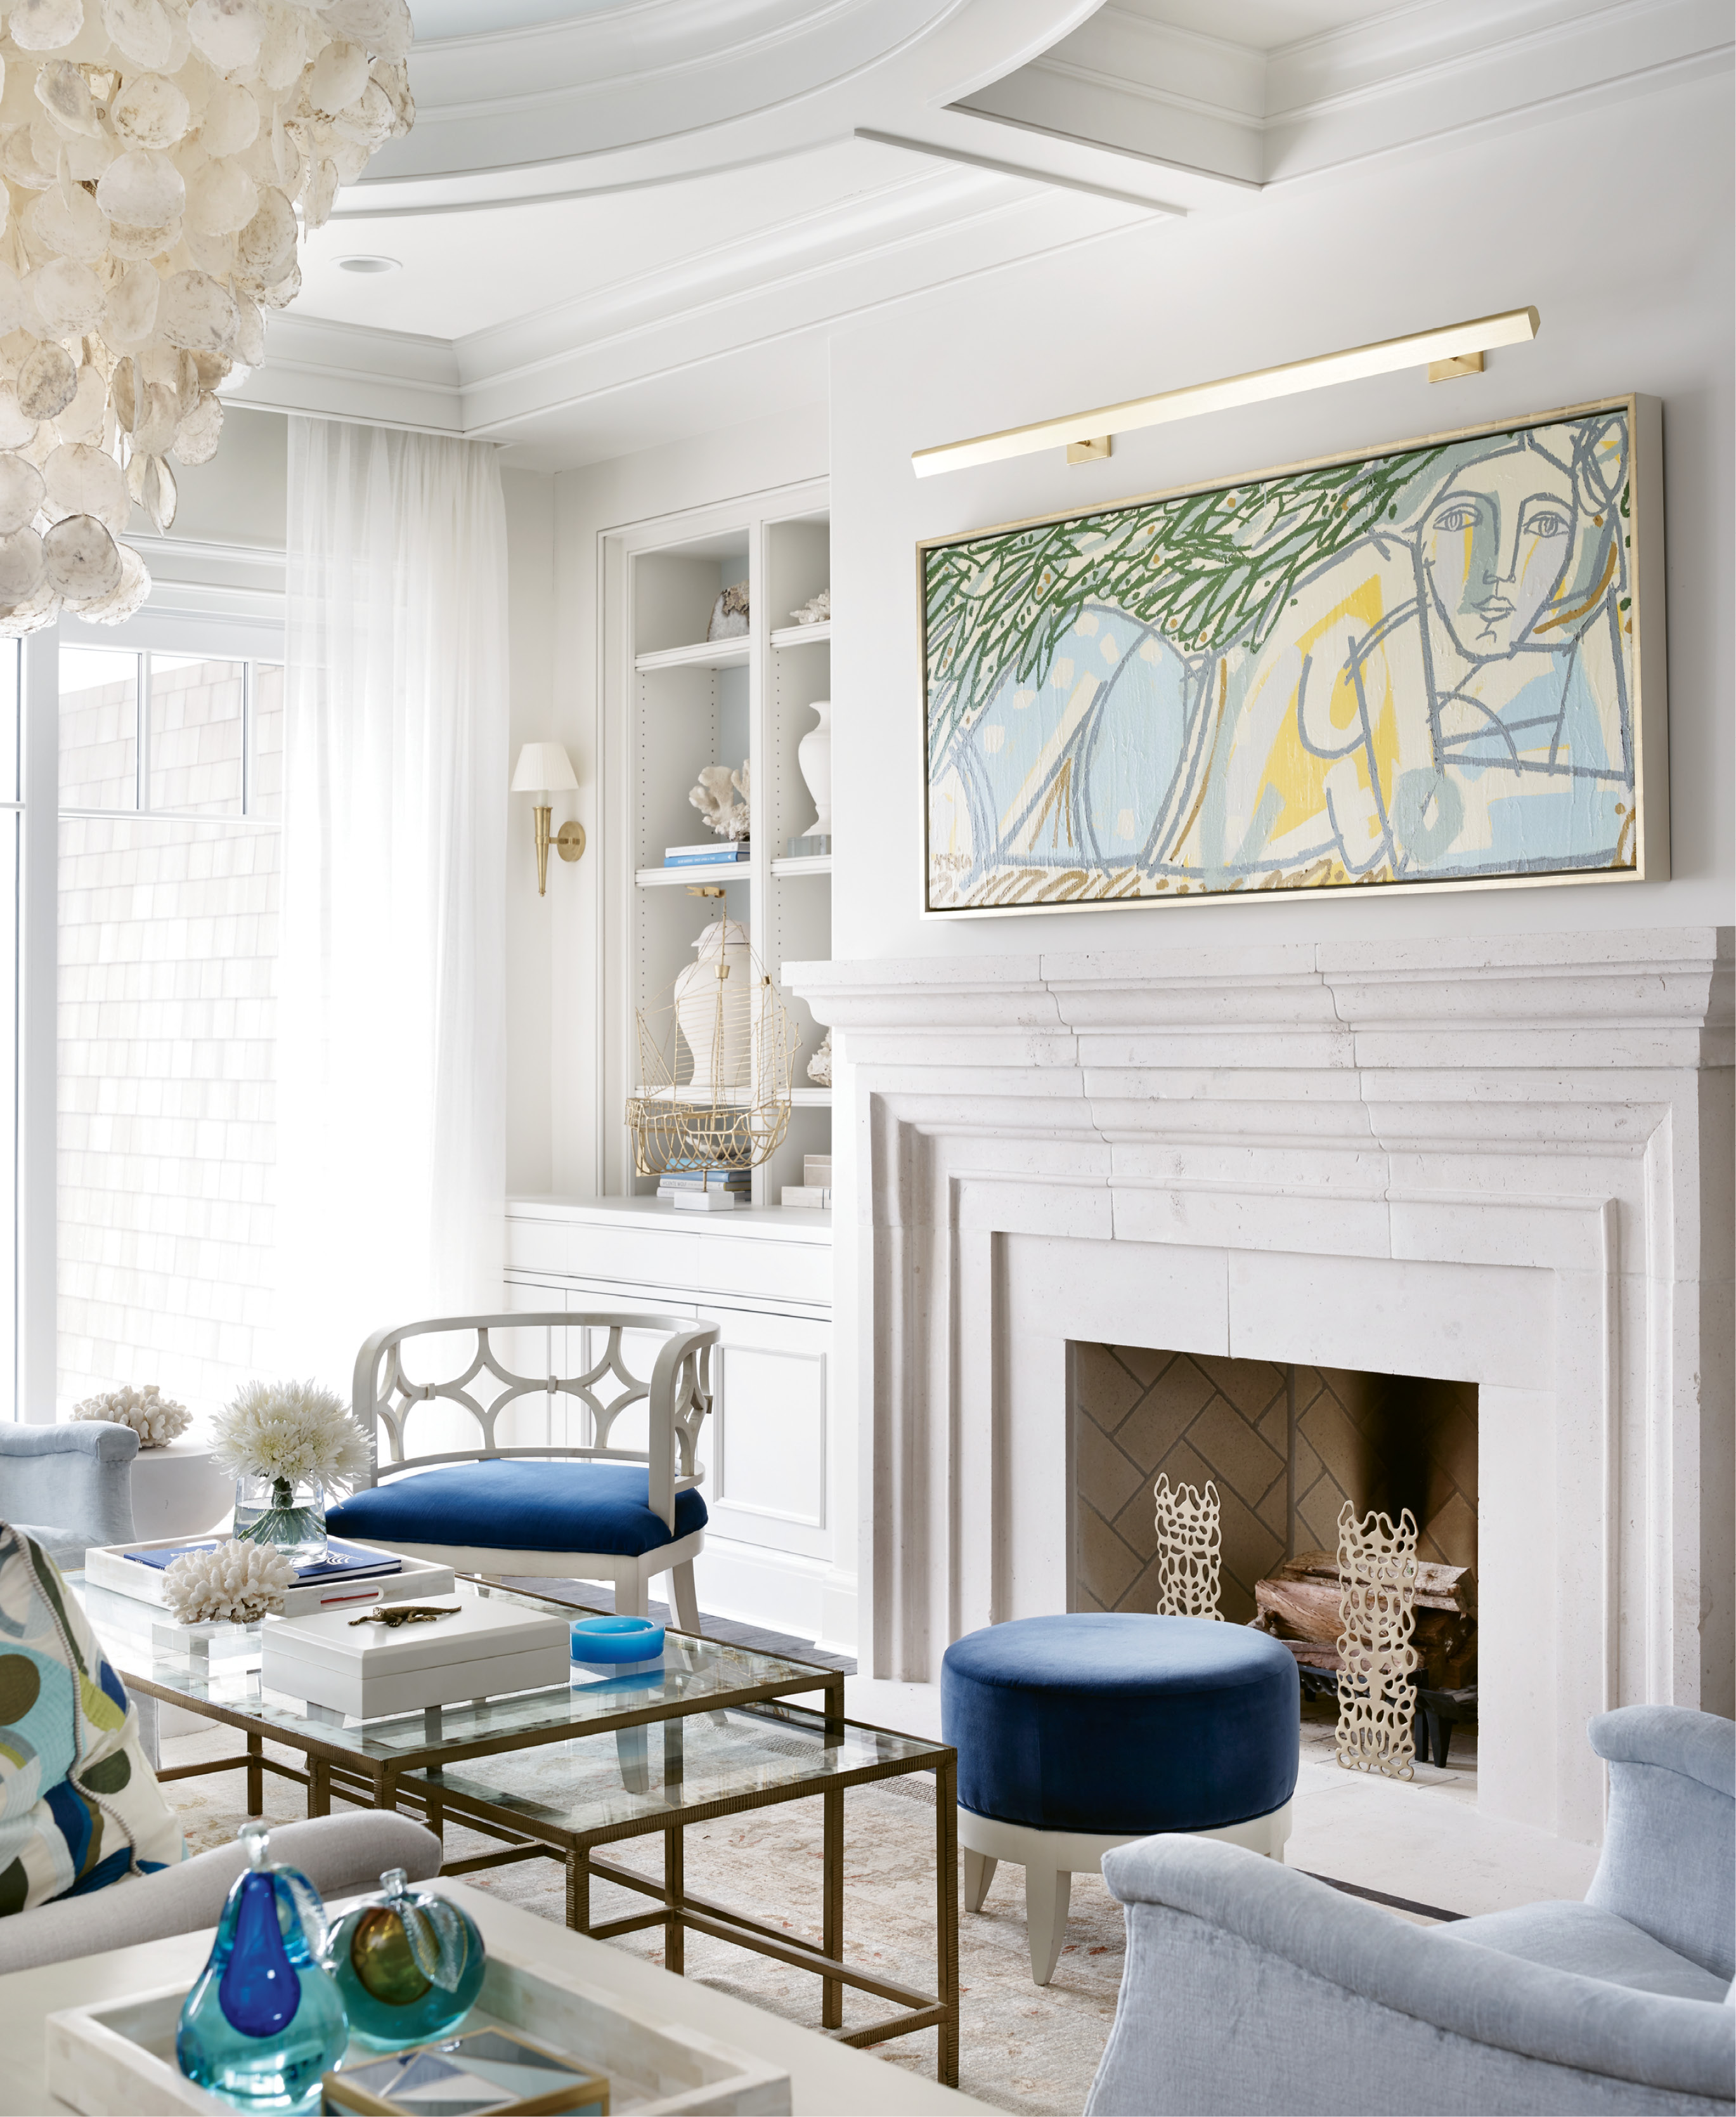 A painting by Colombian-American artist America Martin presides over the hearth.